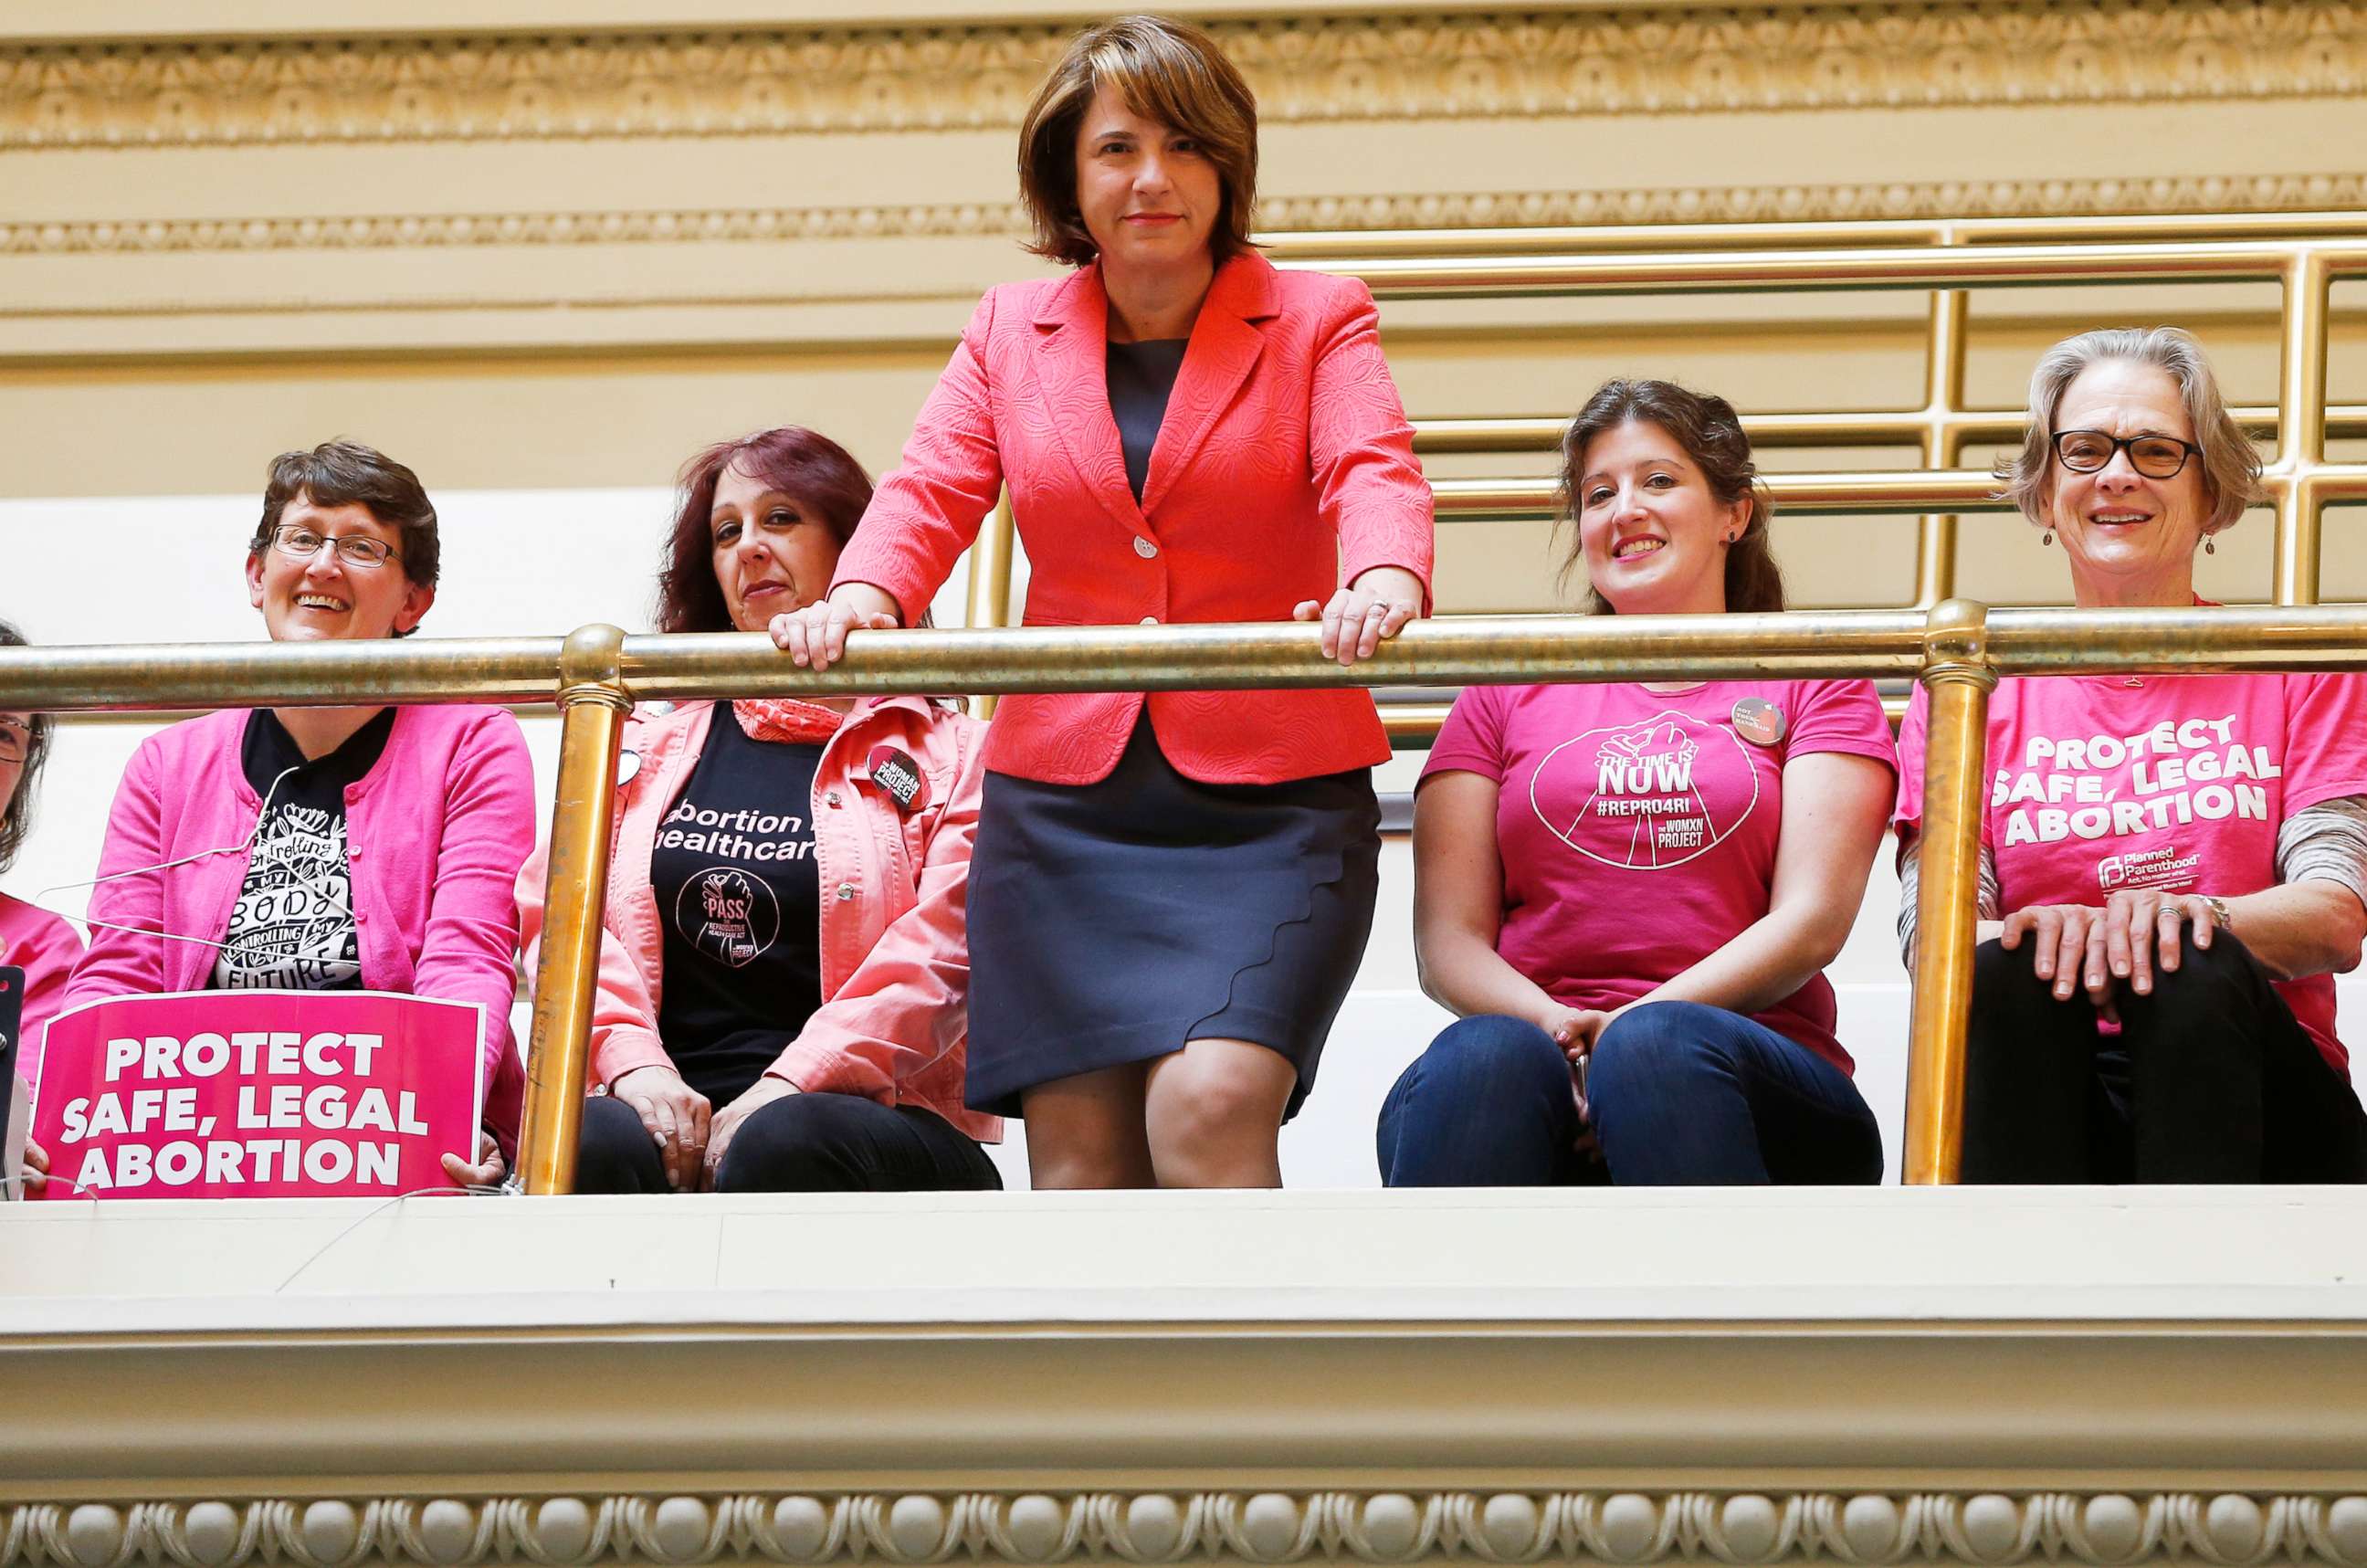 PHOTO: Gayle Goldin, a Providence Democrat and lead sponsor of Rhode Islands abortion-rights bill, poses for a portrait with pro-choice supporters at the Rhode Island State House in Providence, May 15, 2019.